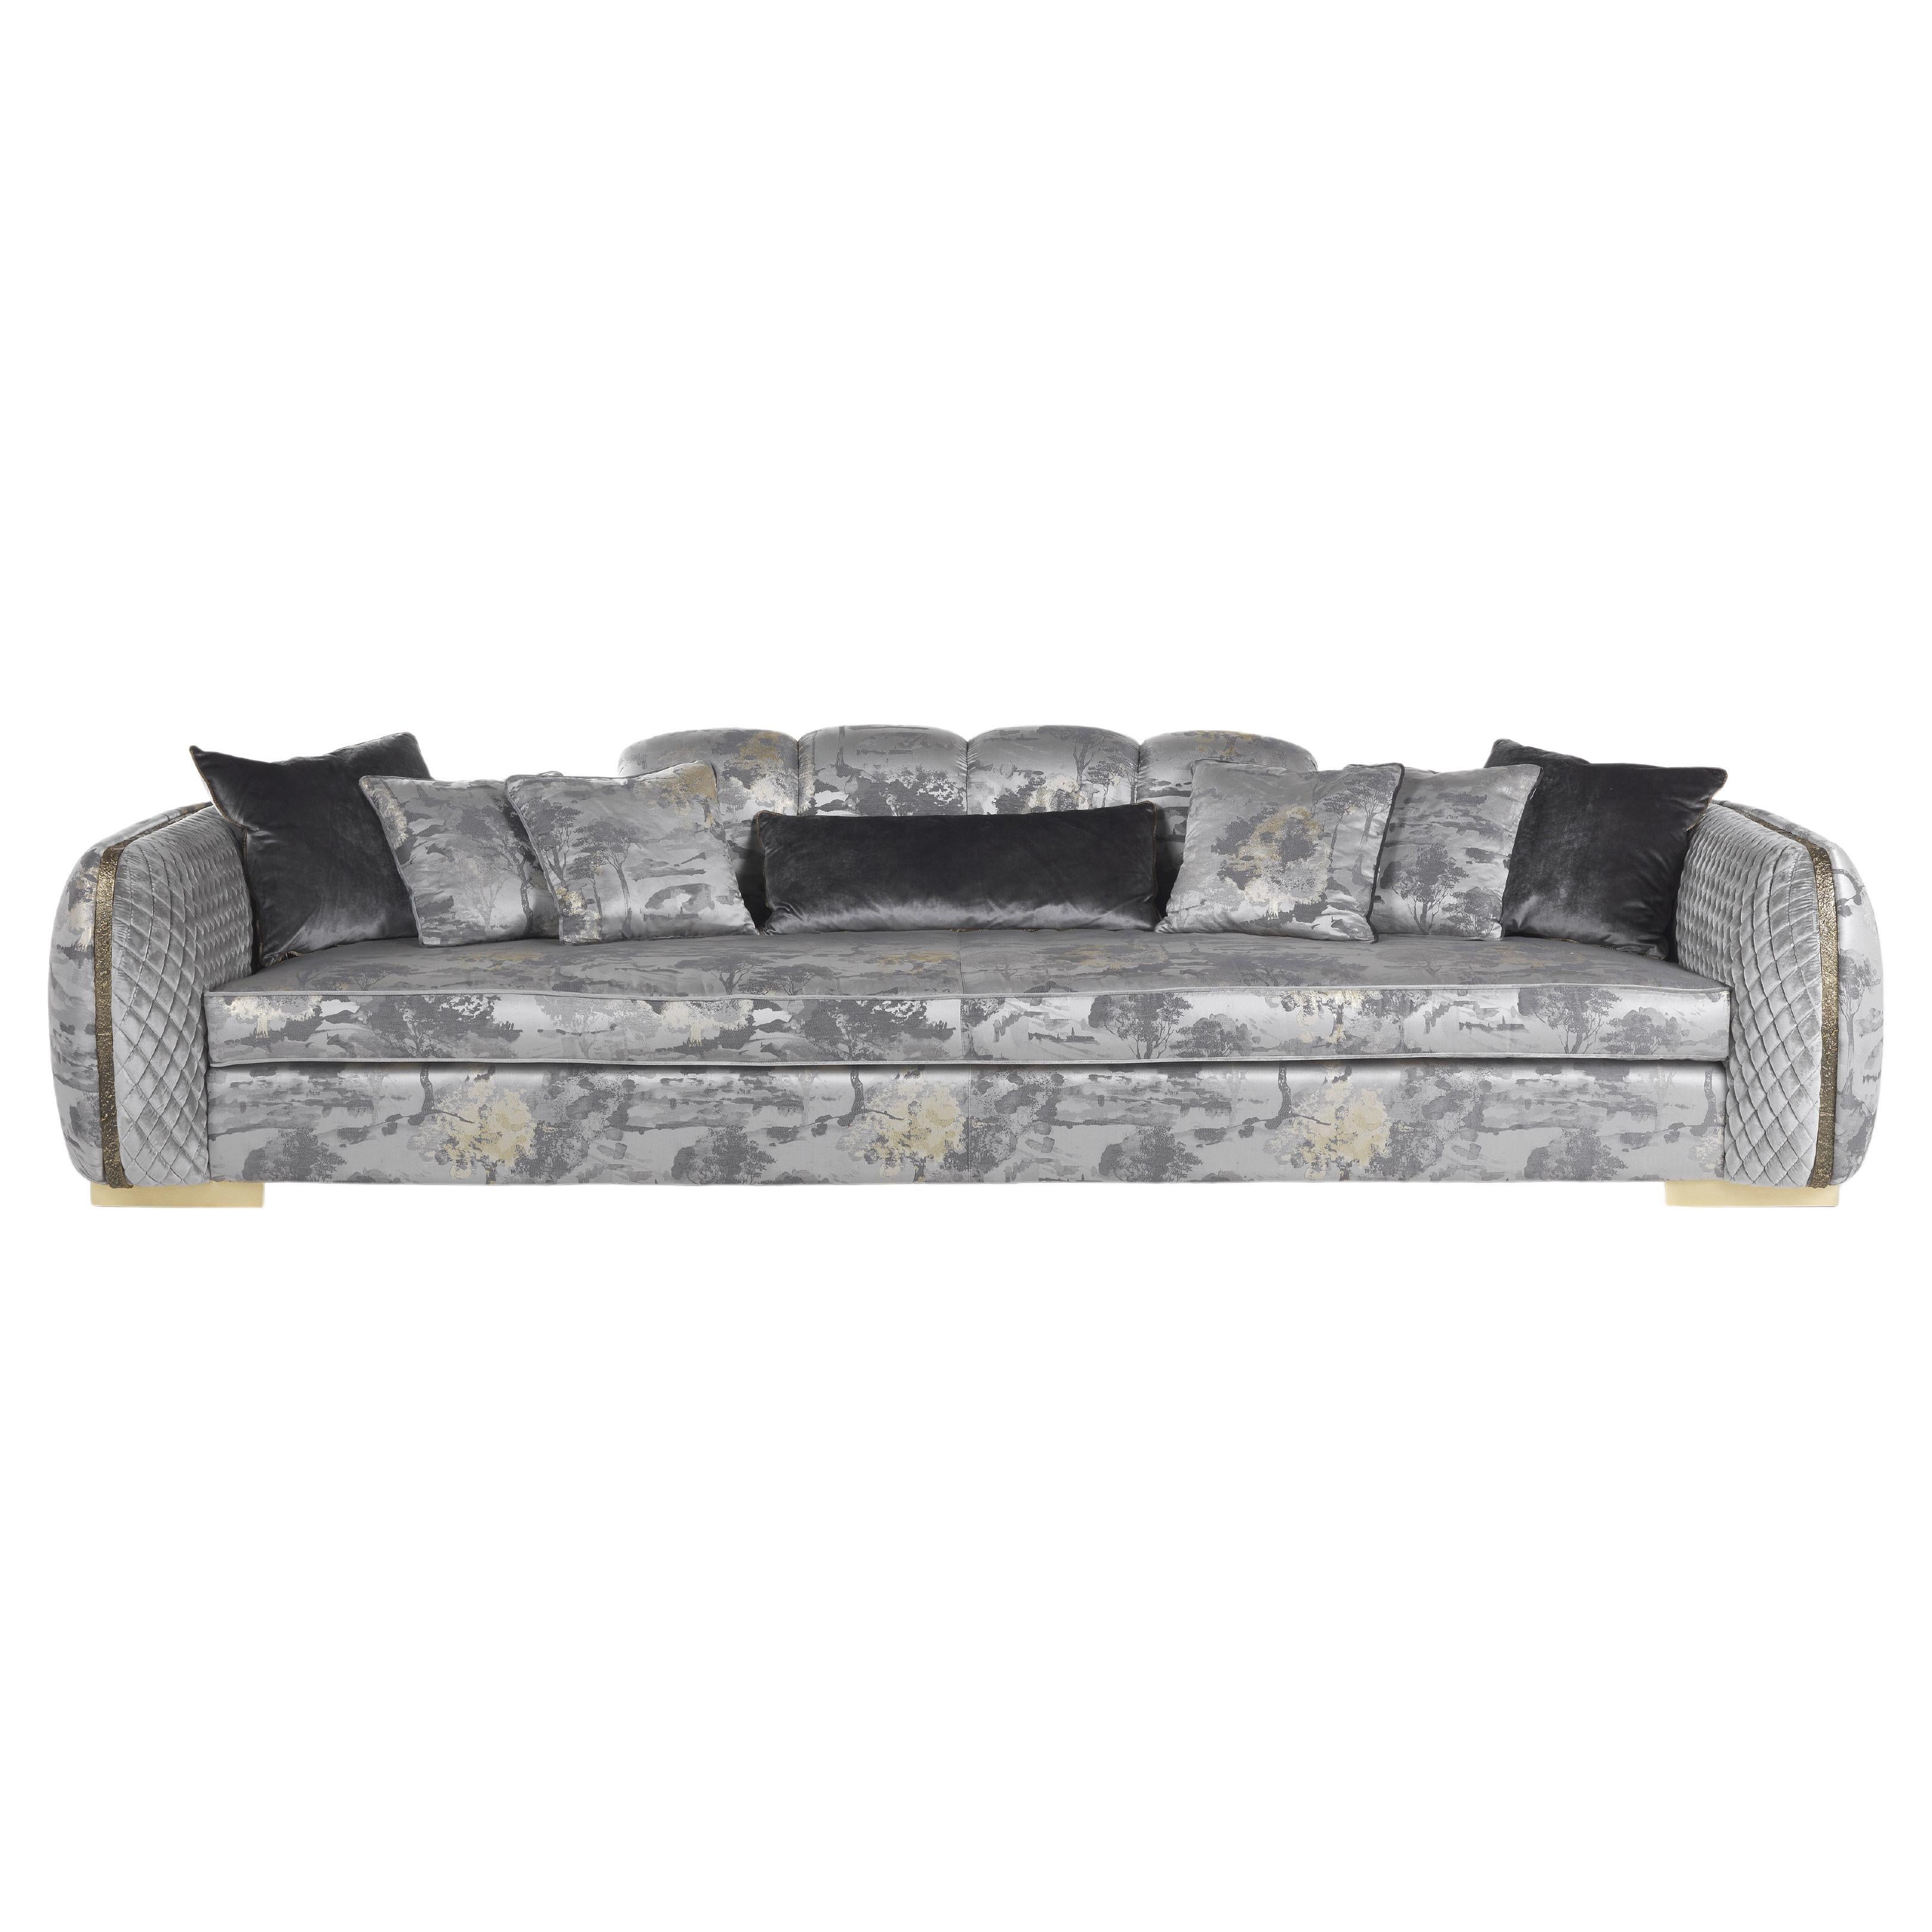 21st Century Arkè 3-Seater Sofa in Fabric with Details in Lost-wax Cast Brass